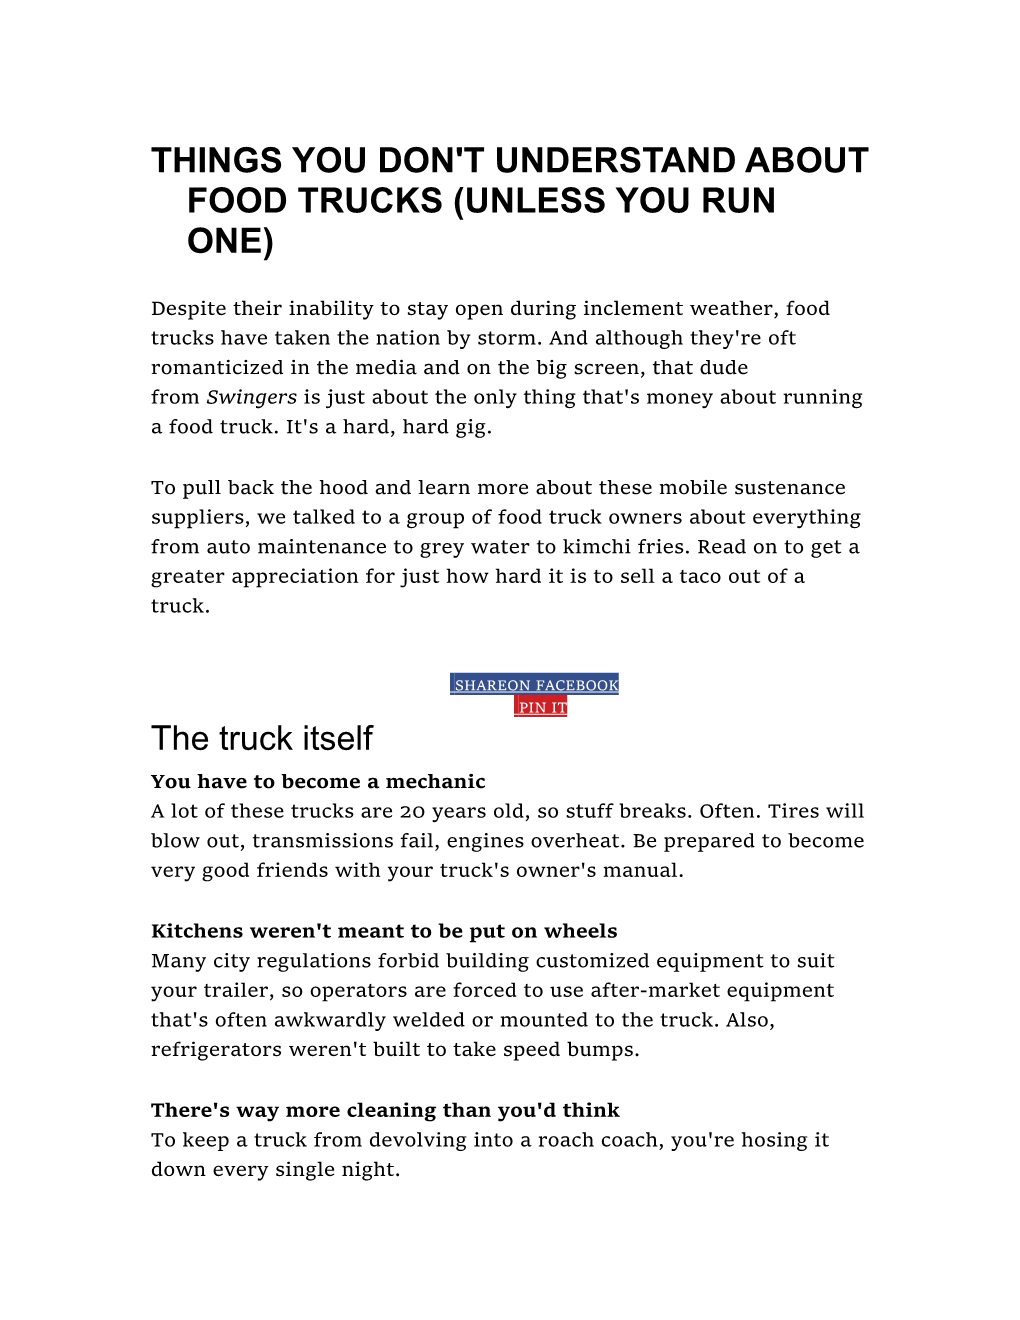 Things You Don't Understand About Food Trucks (Unless You Run One)